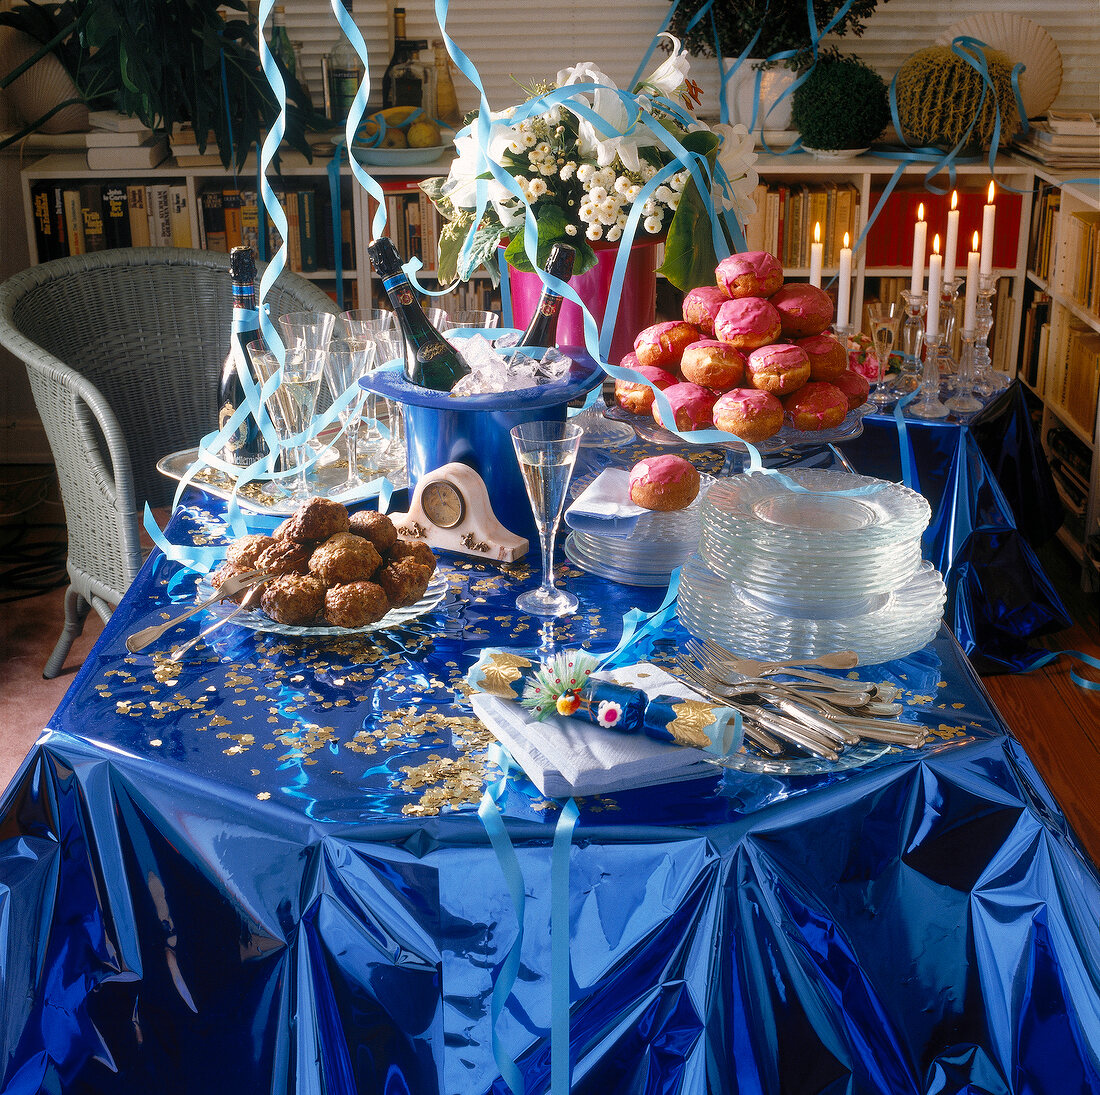 Laid table with blue shiny tablecloth, confetti, flowers and food for new year